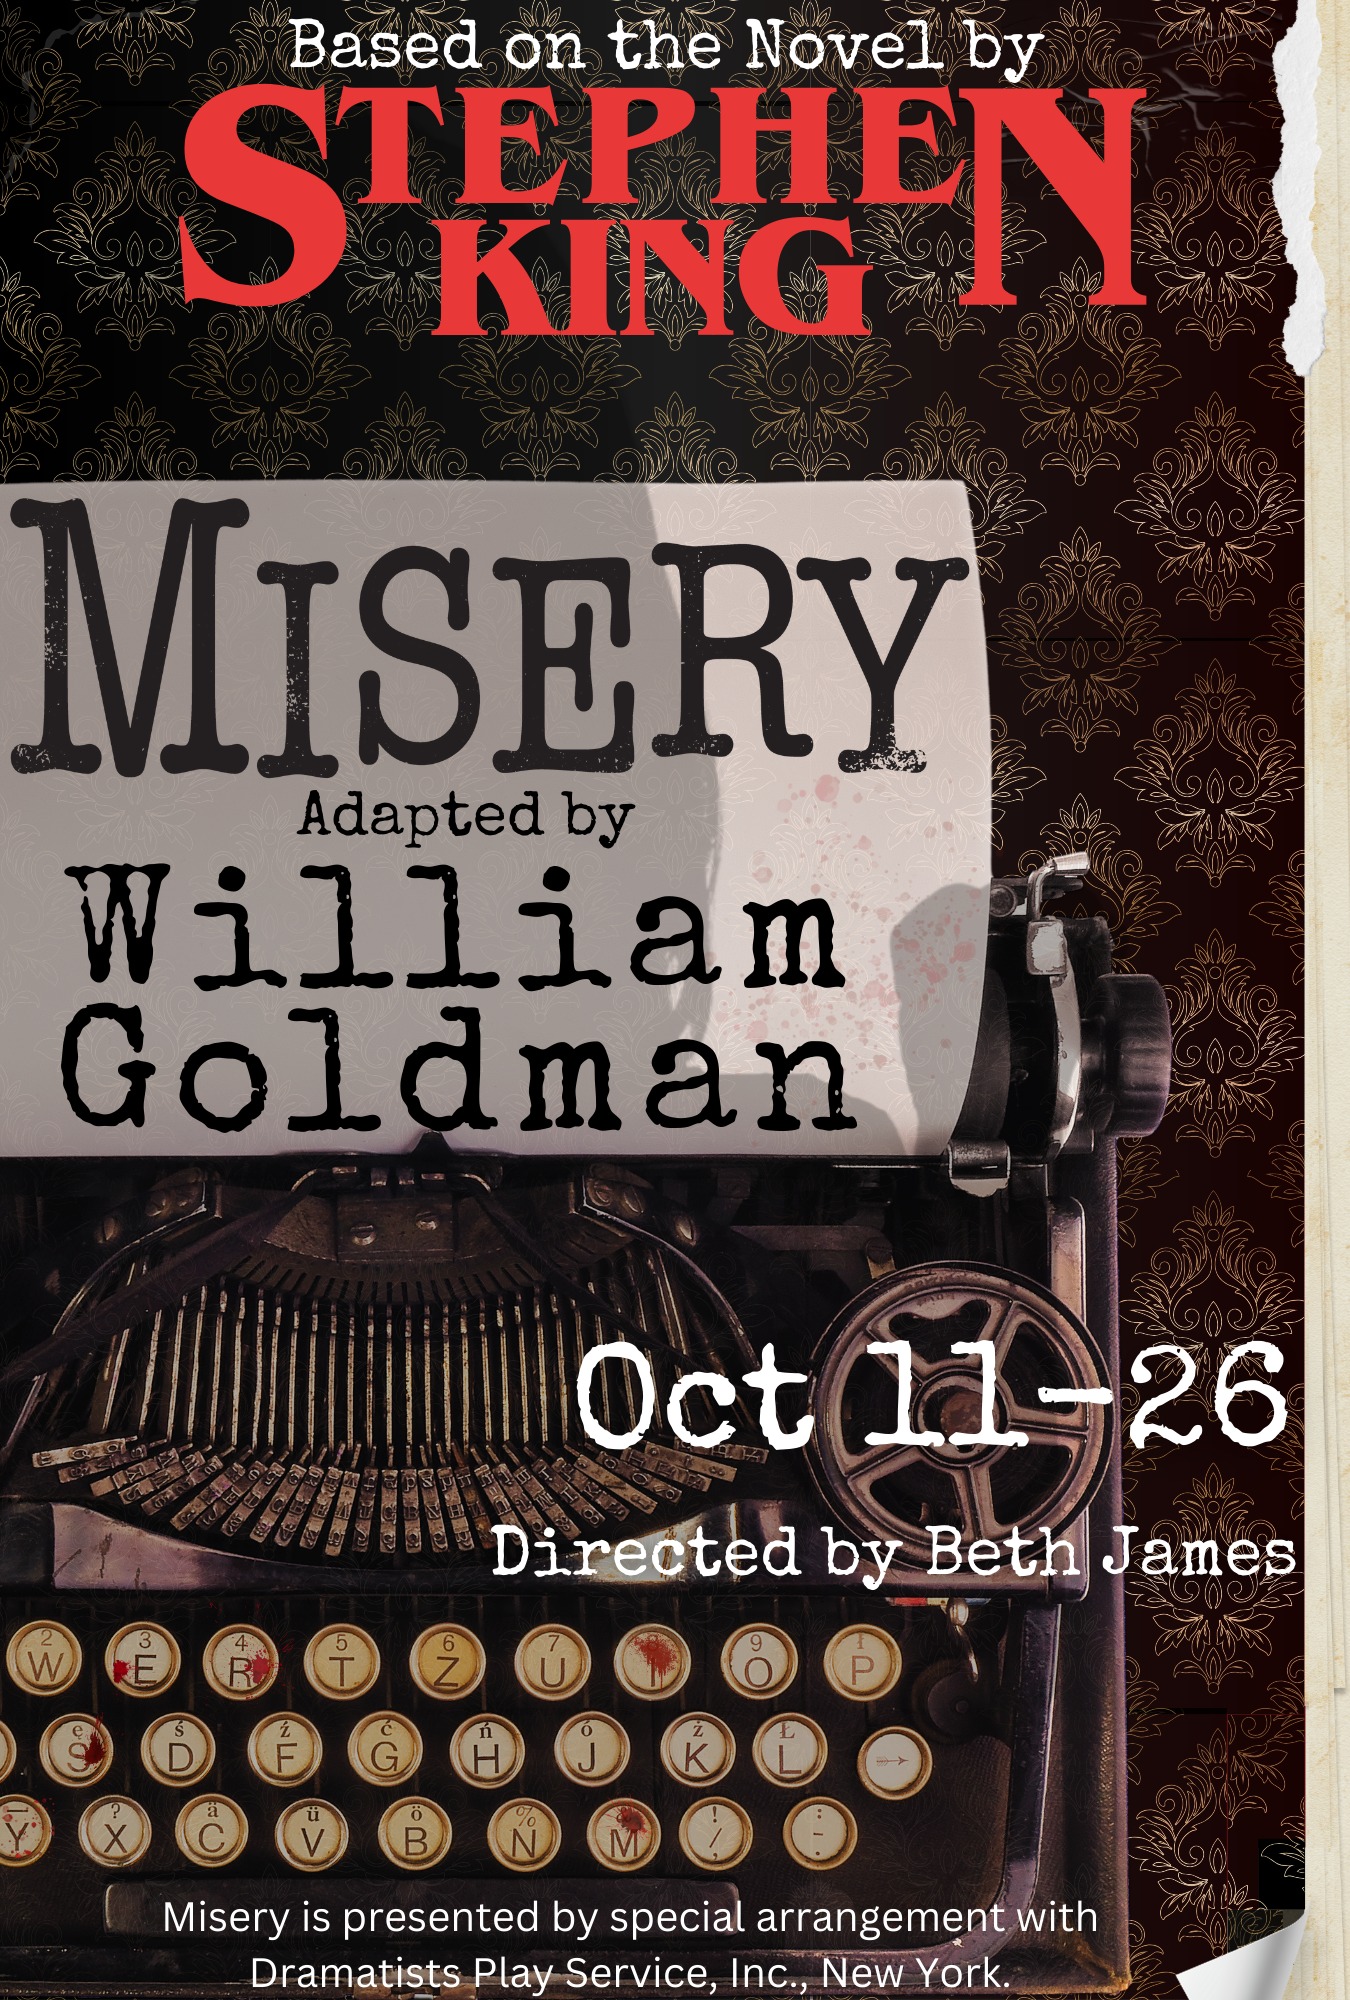 CTX3761. Auditions for Misery, by Gaslight Baker Theatre, Lockhart